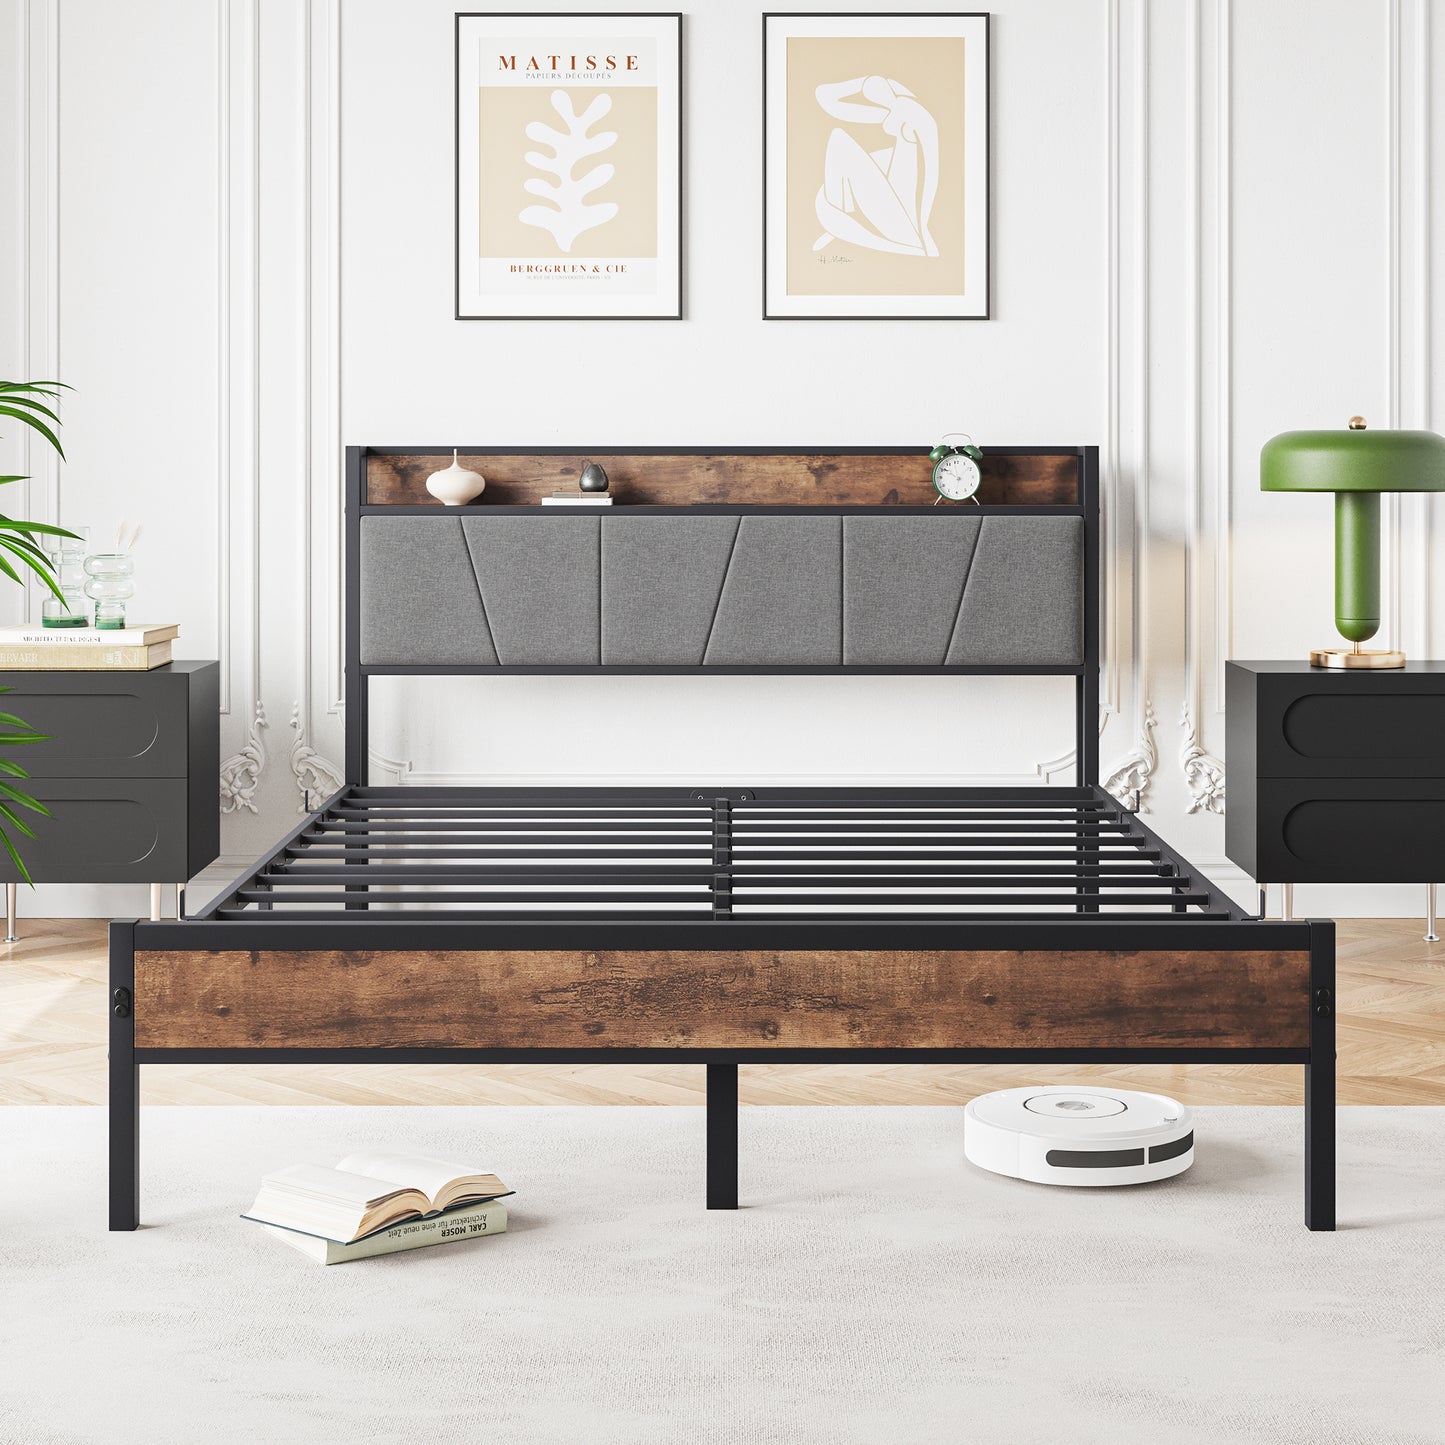 Queen-Sized Platform Bedframe with Storage and Rustic Wooden Head Board_2